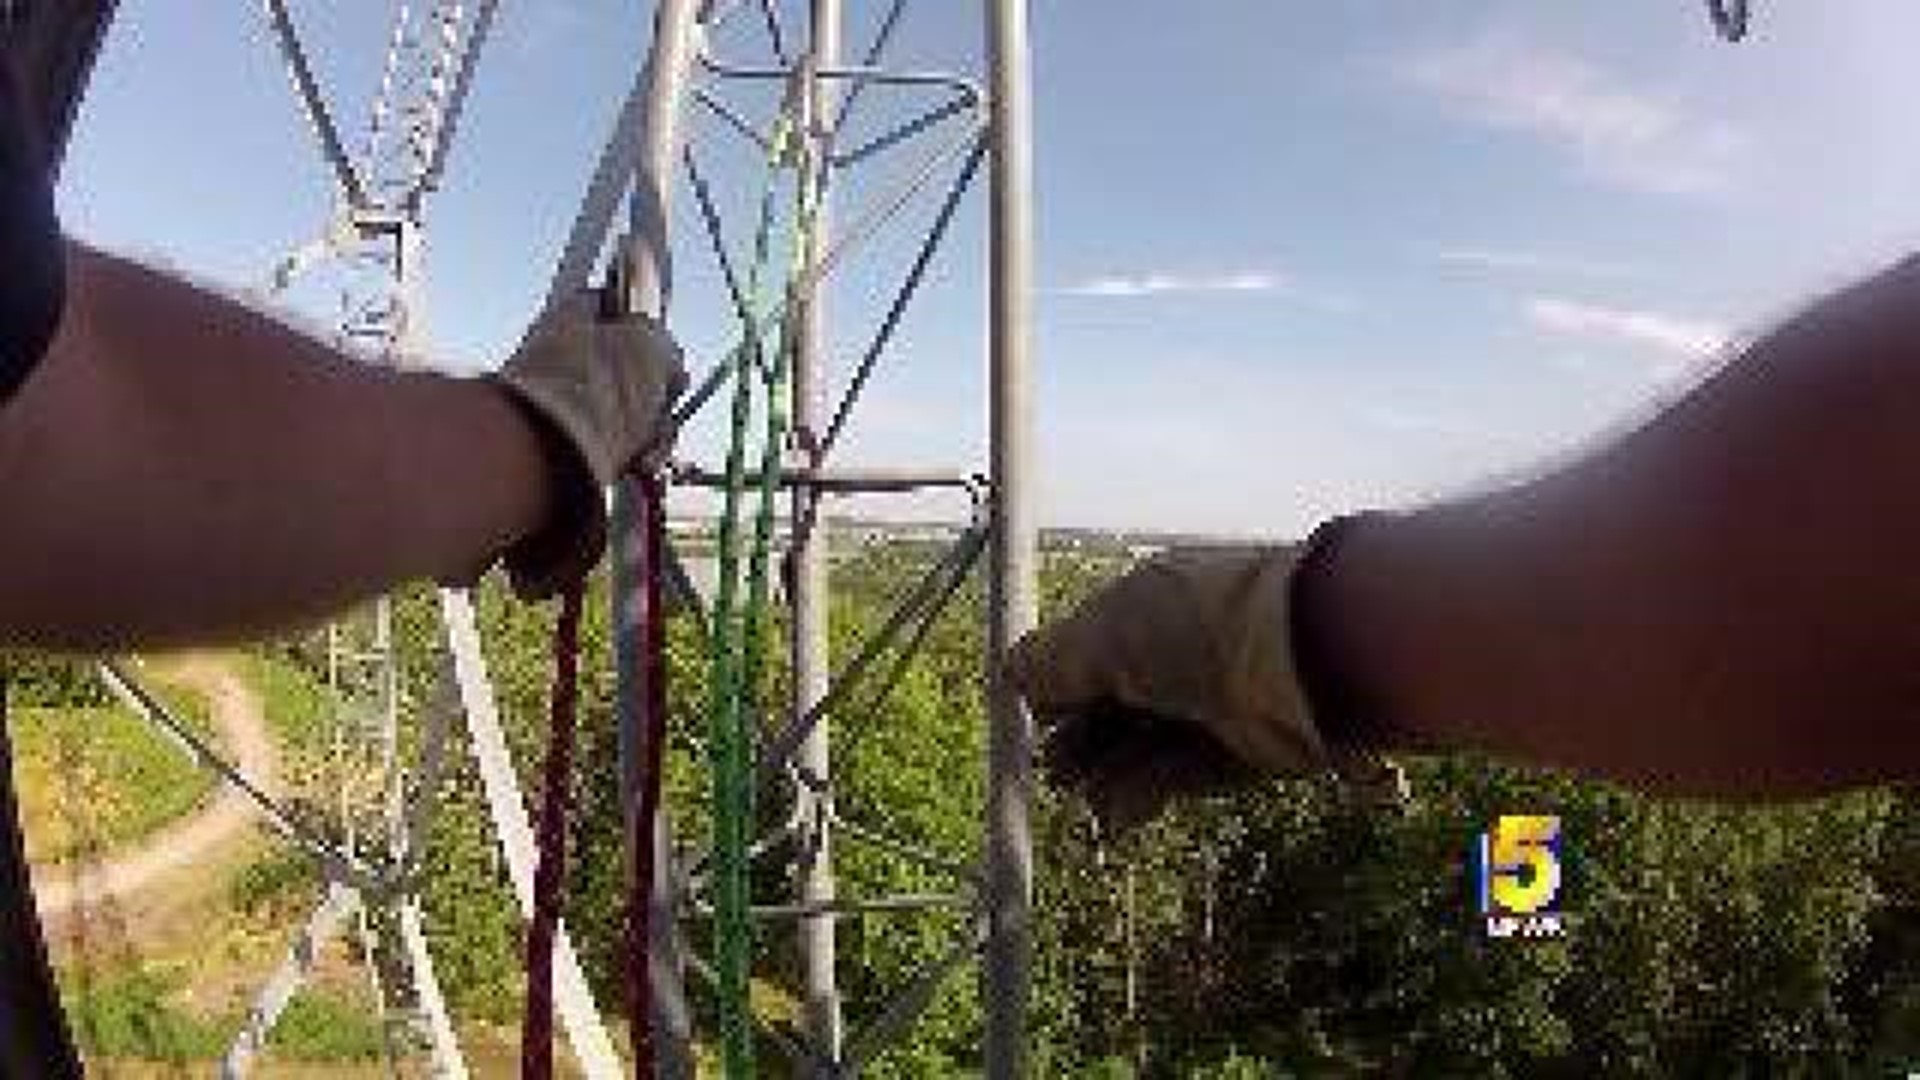 Firefighters Practice High-Angle Rescues